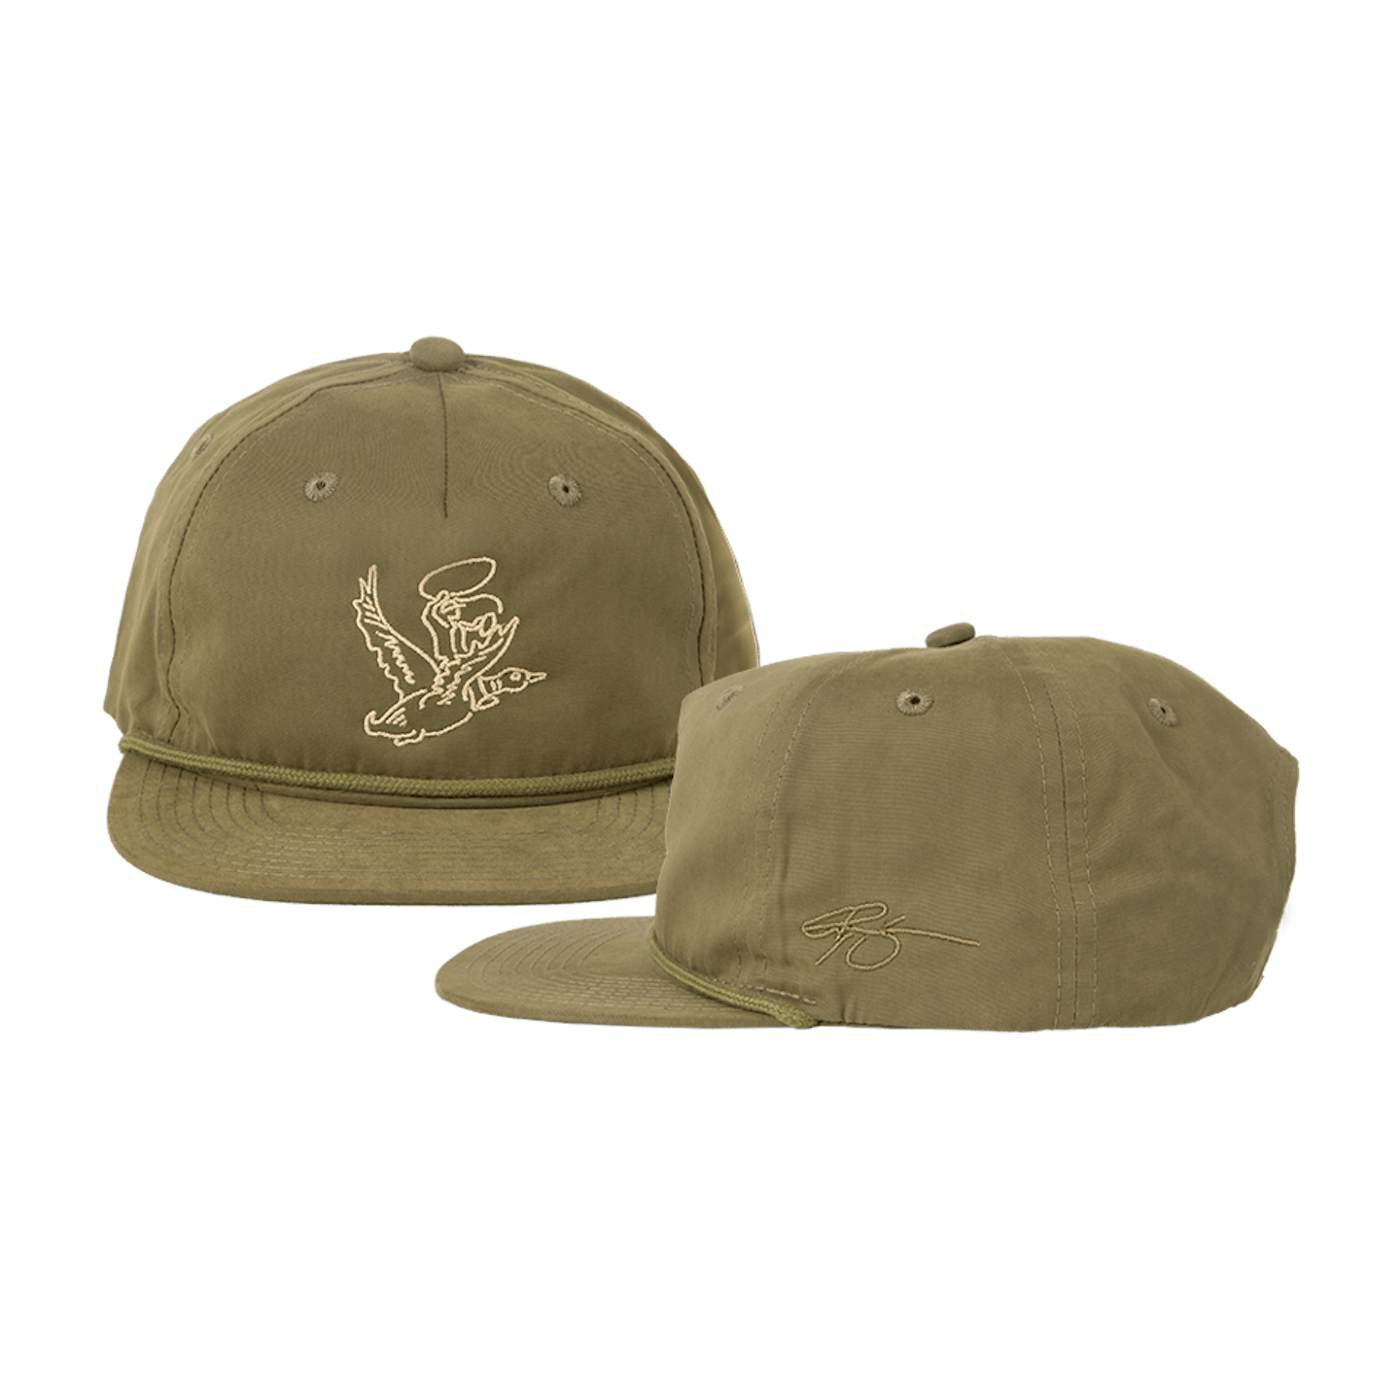 Riley Green Embroidered Duckman Hat - Green